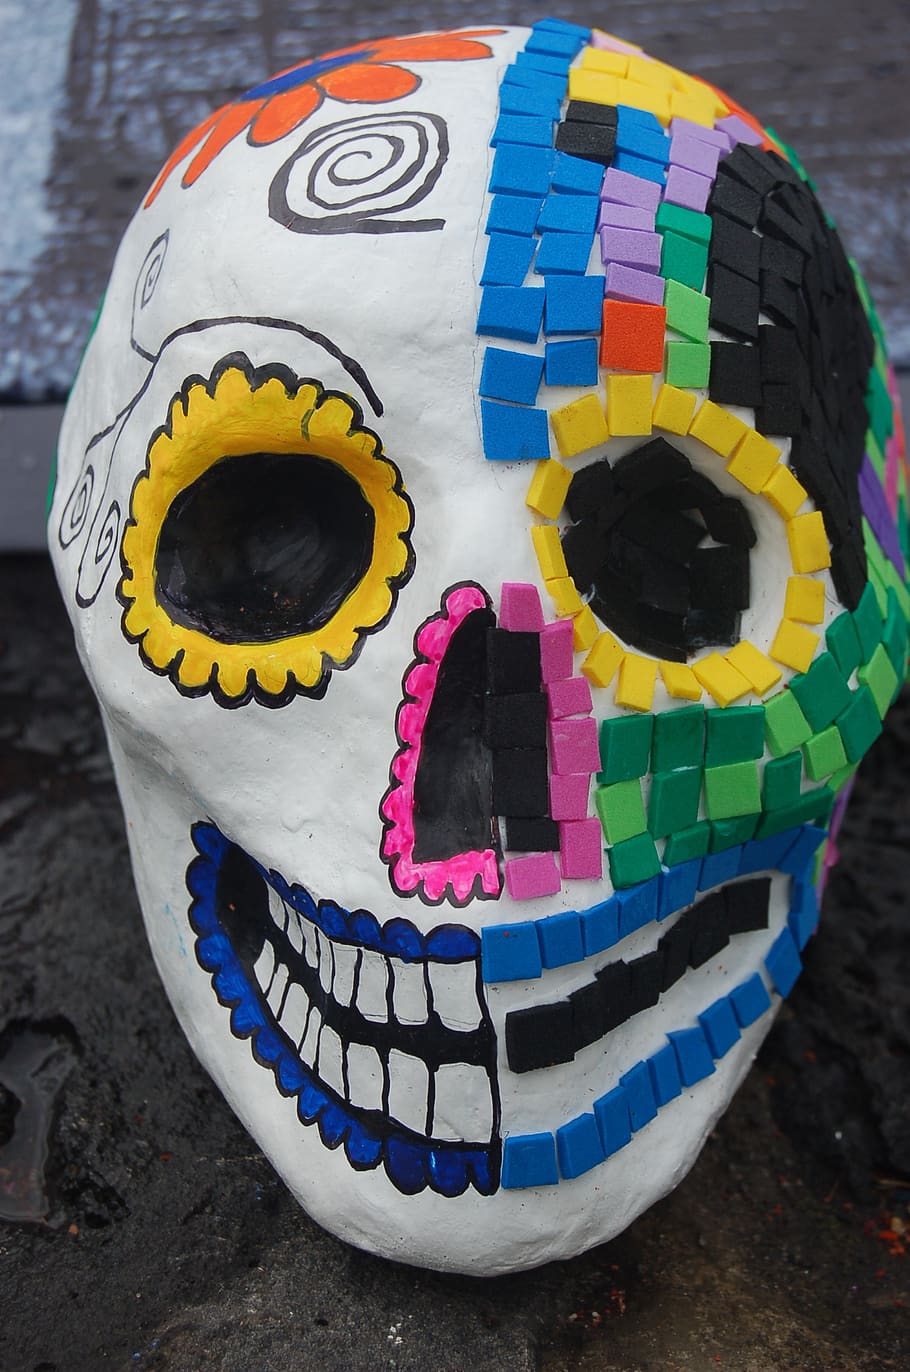 mexico, tradition, mexican, offering, culture, crafts, day of the dead, skull, latino, multi colored